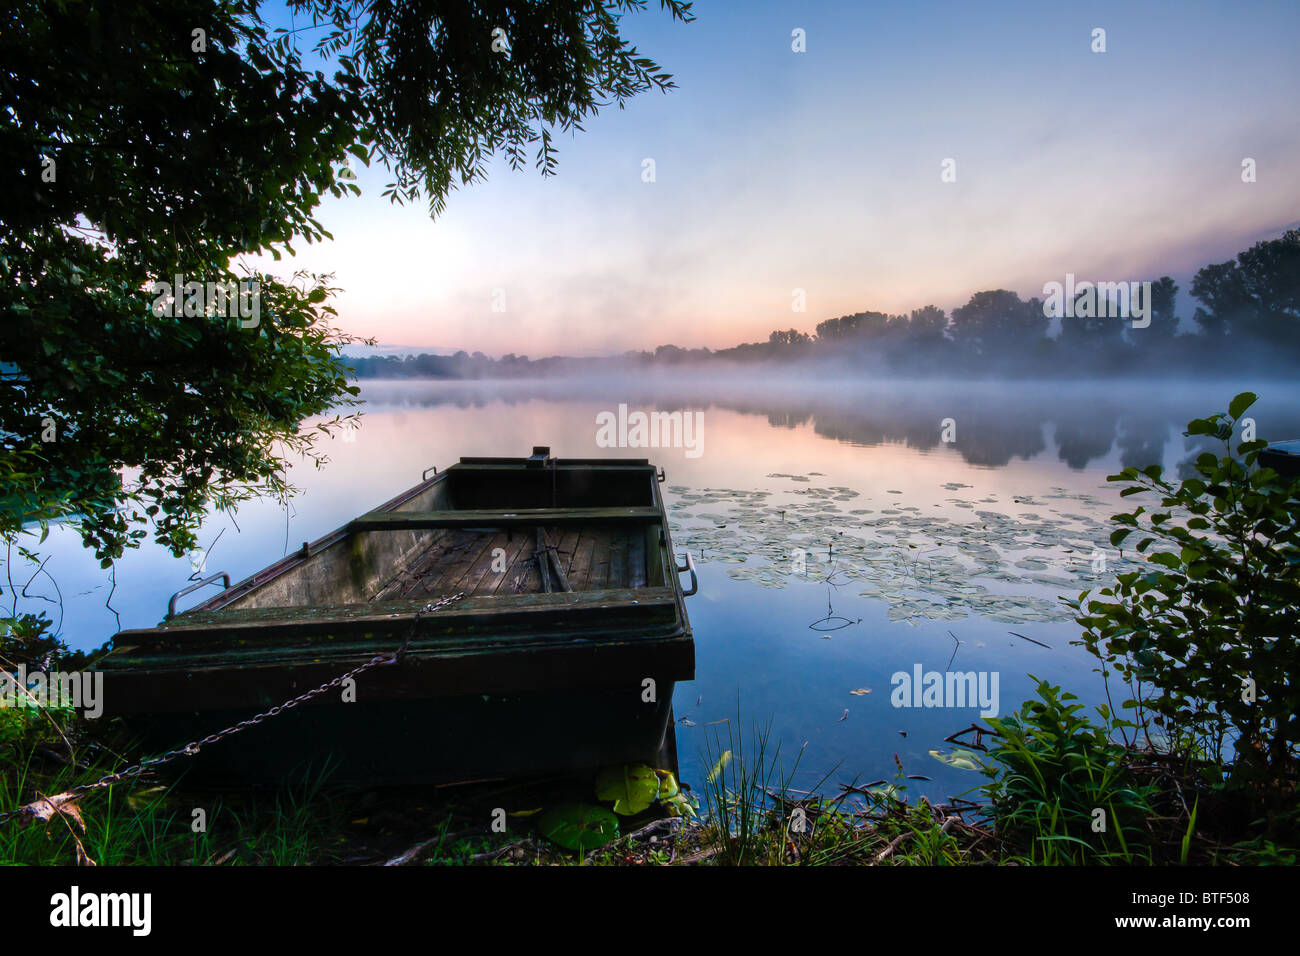 Sunrise at a lake with boats Stock Photo